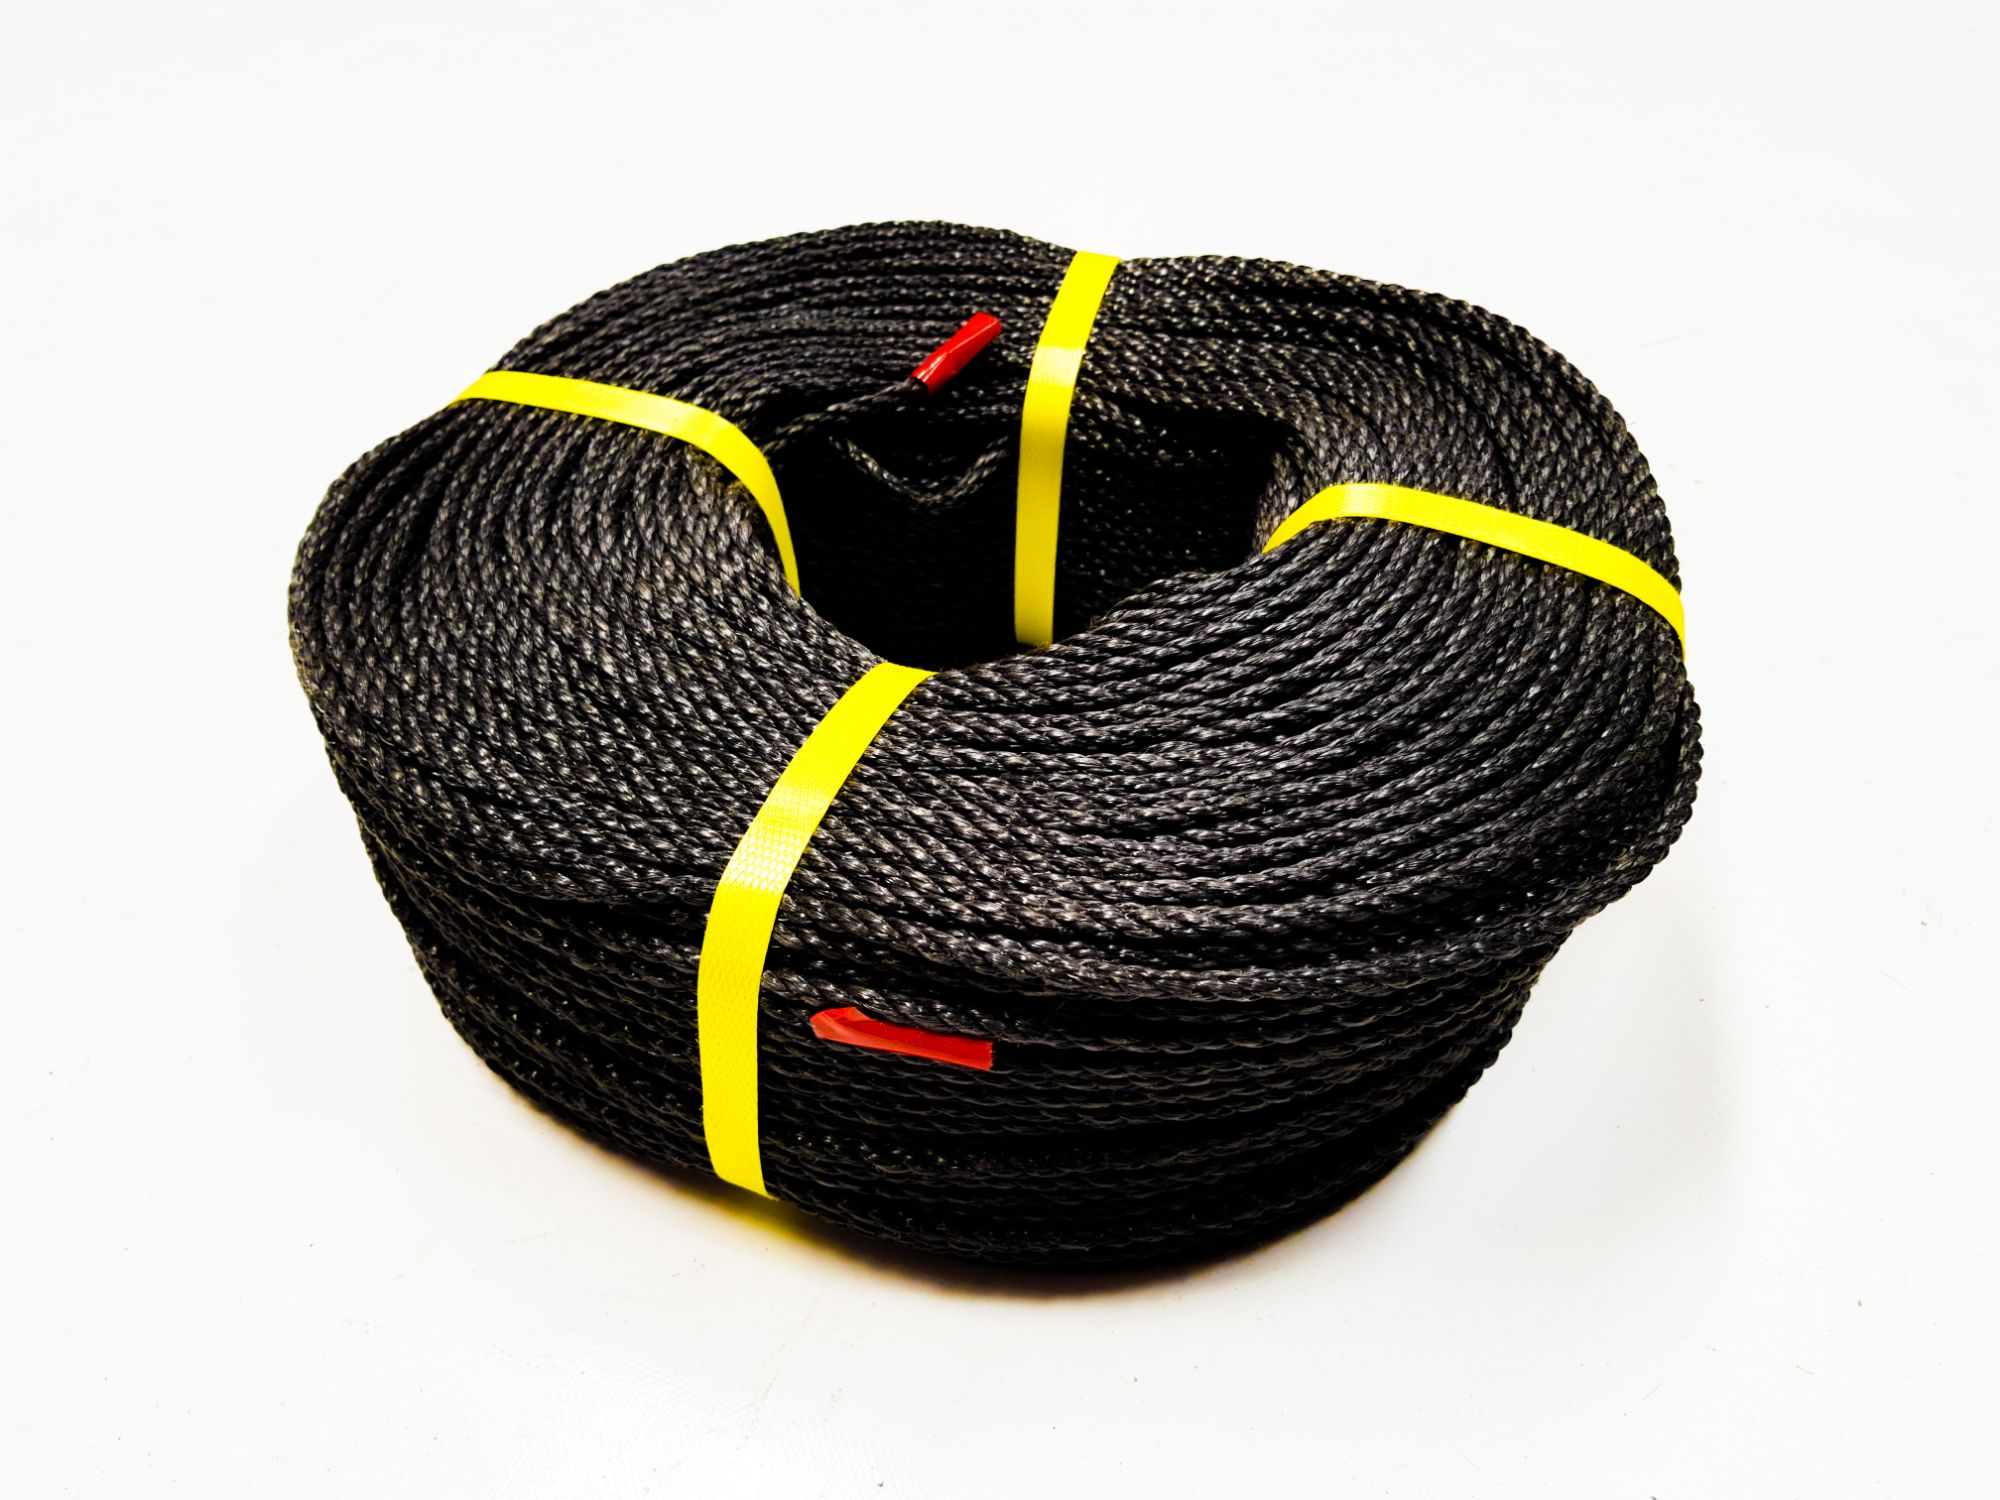 Polypropylene Rope For Sale in Perth, Western Australia